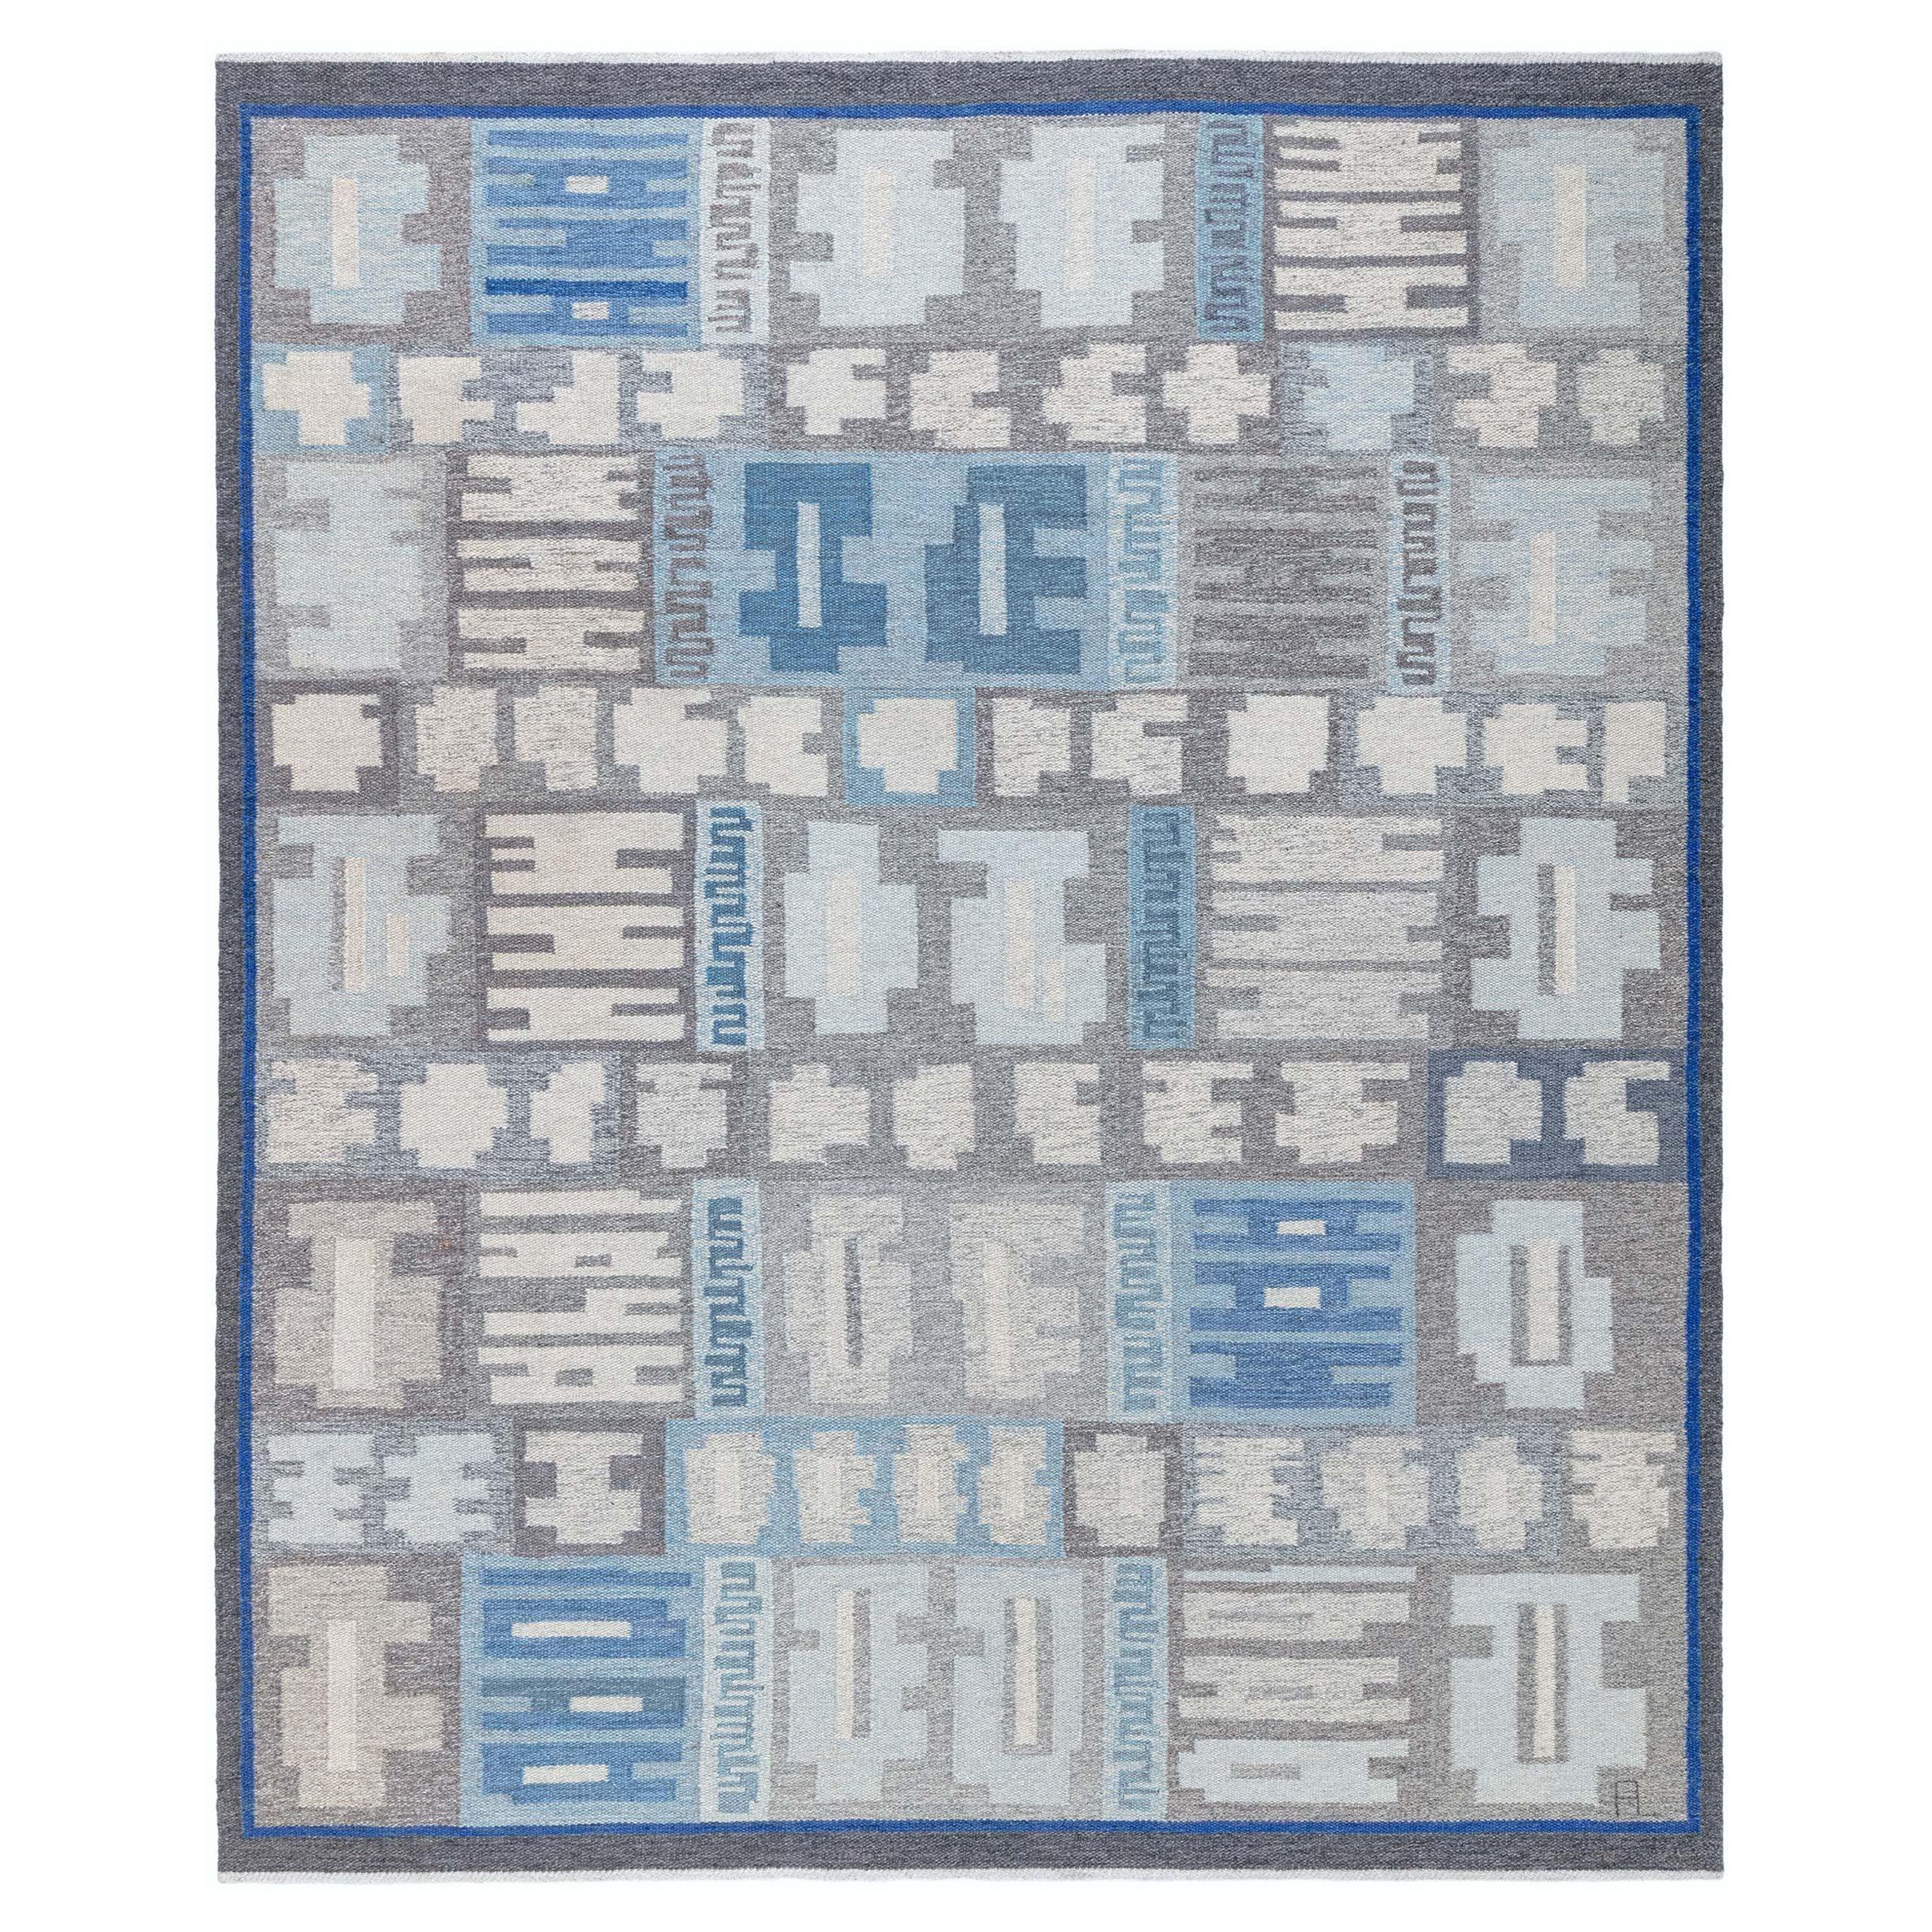 Swedish Flat Woven Rug by Alice Lund